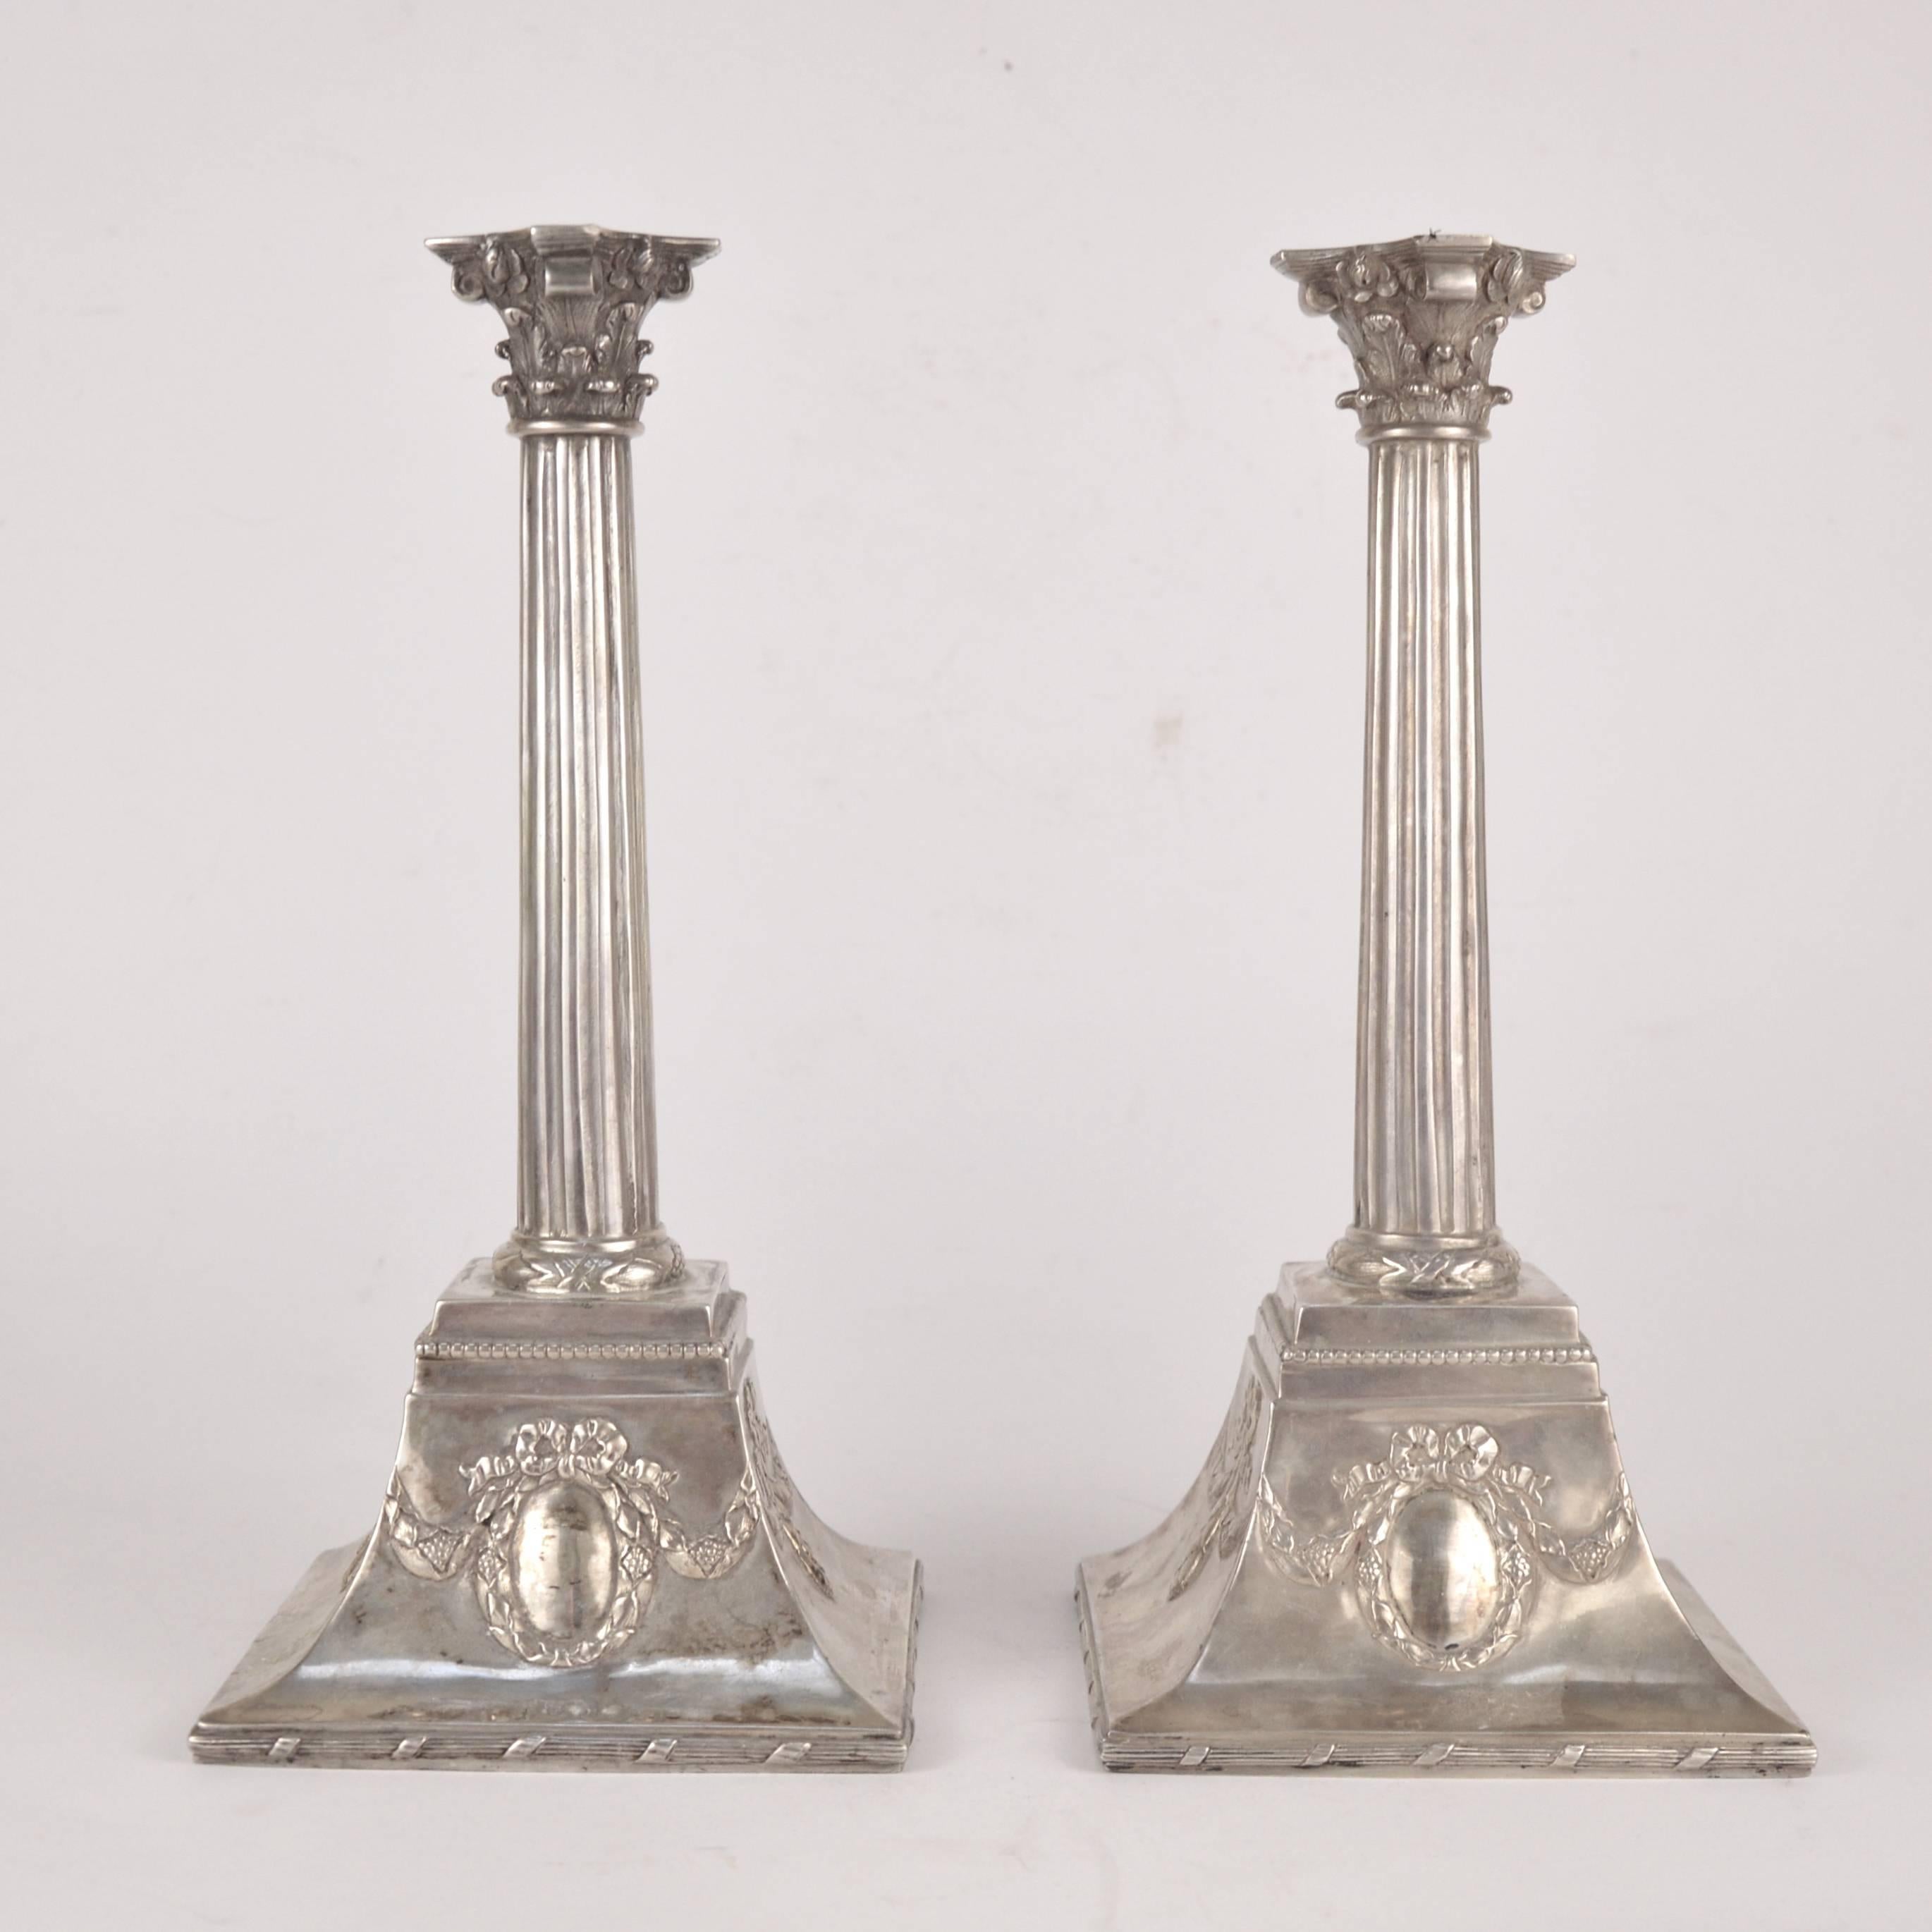 Empire Pair of English Silver Candlesticks, 19th Century